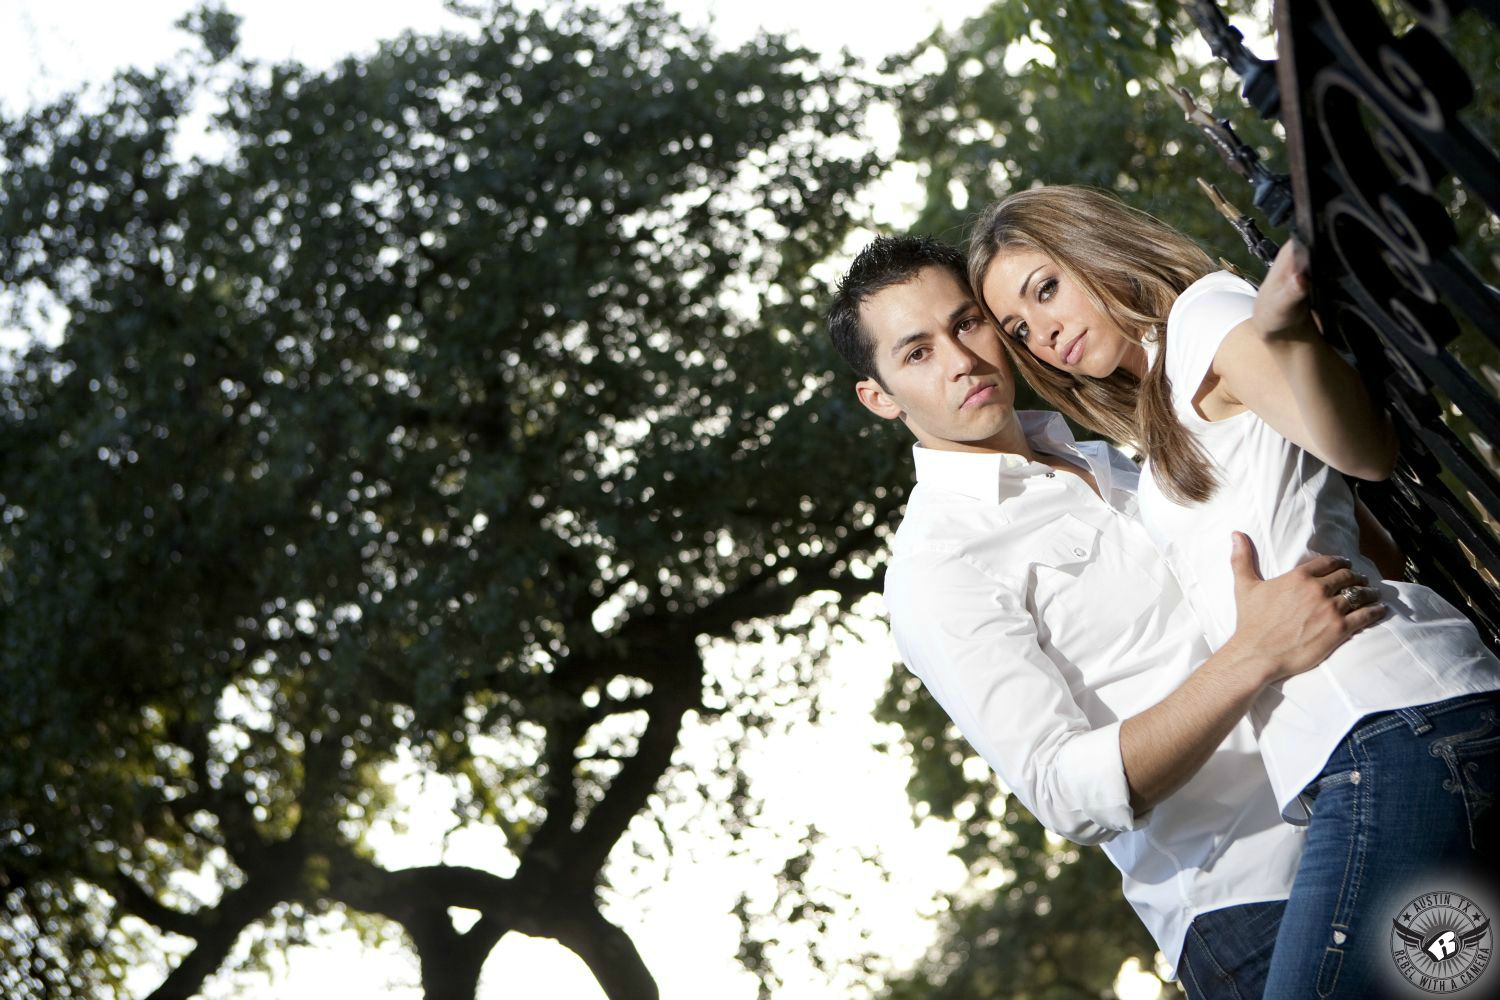 Strawberry blond Latino girl in white short sleeve top and blue jeans is held at waist by dark spiky haired guy wearing white shirt unbuttoned at the top and dark blue jeans lean on black rod iron fence at the Texas Capital with the bright sky and out of focus trees in this edgy engagement picture in Austin.